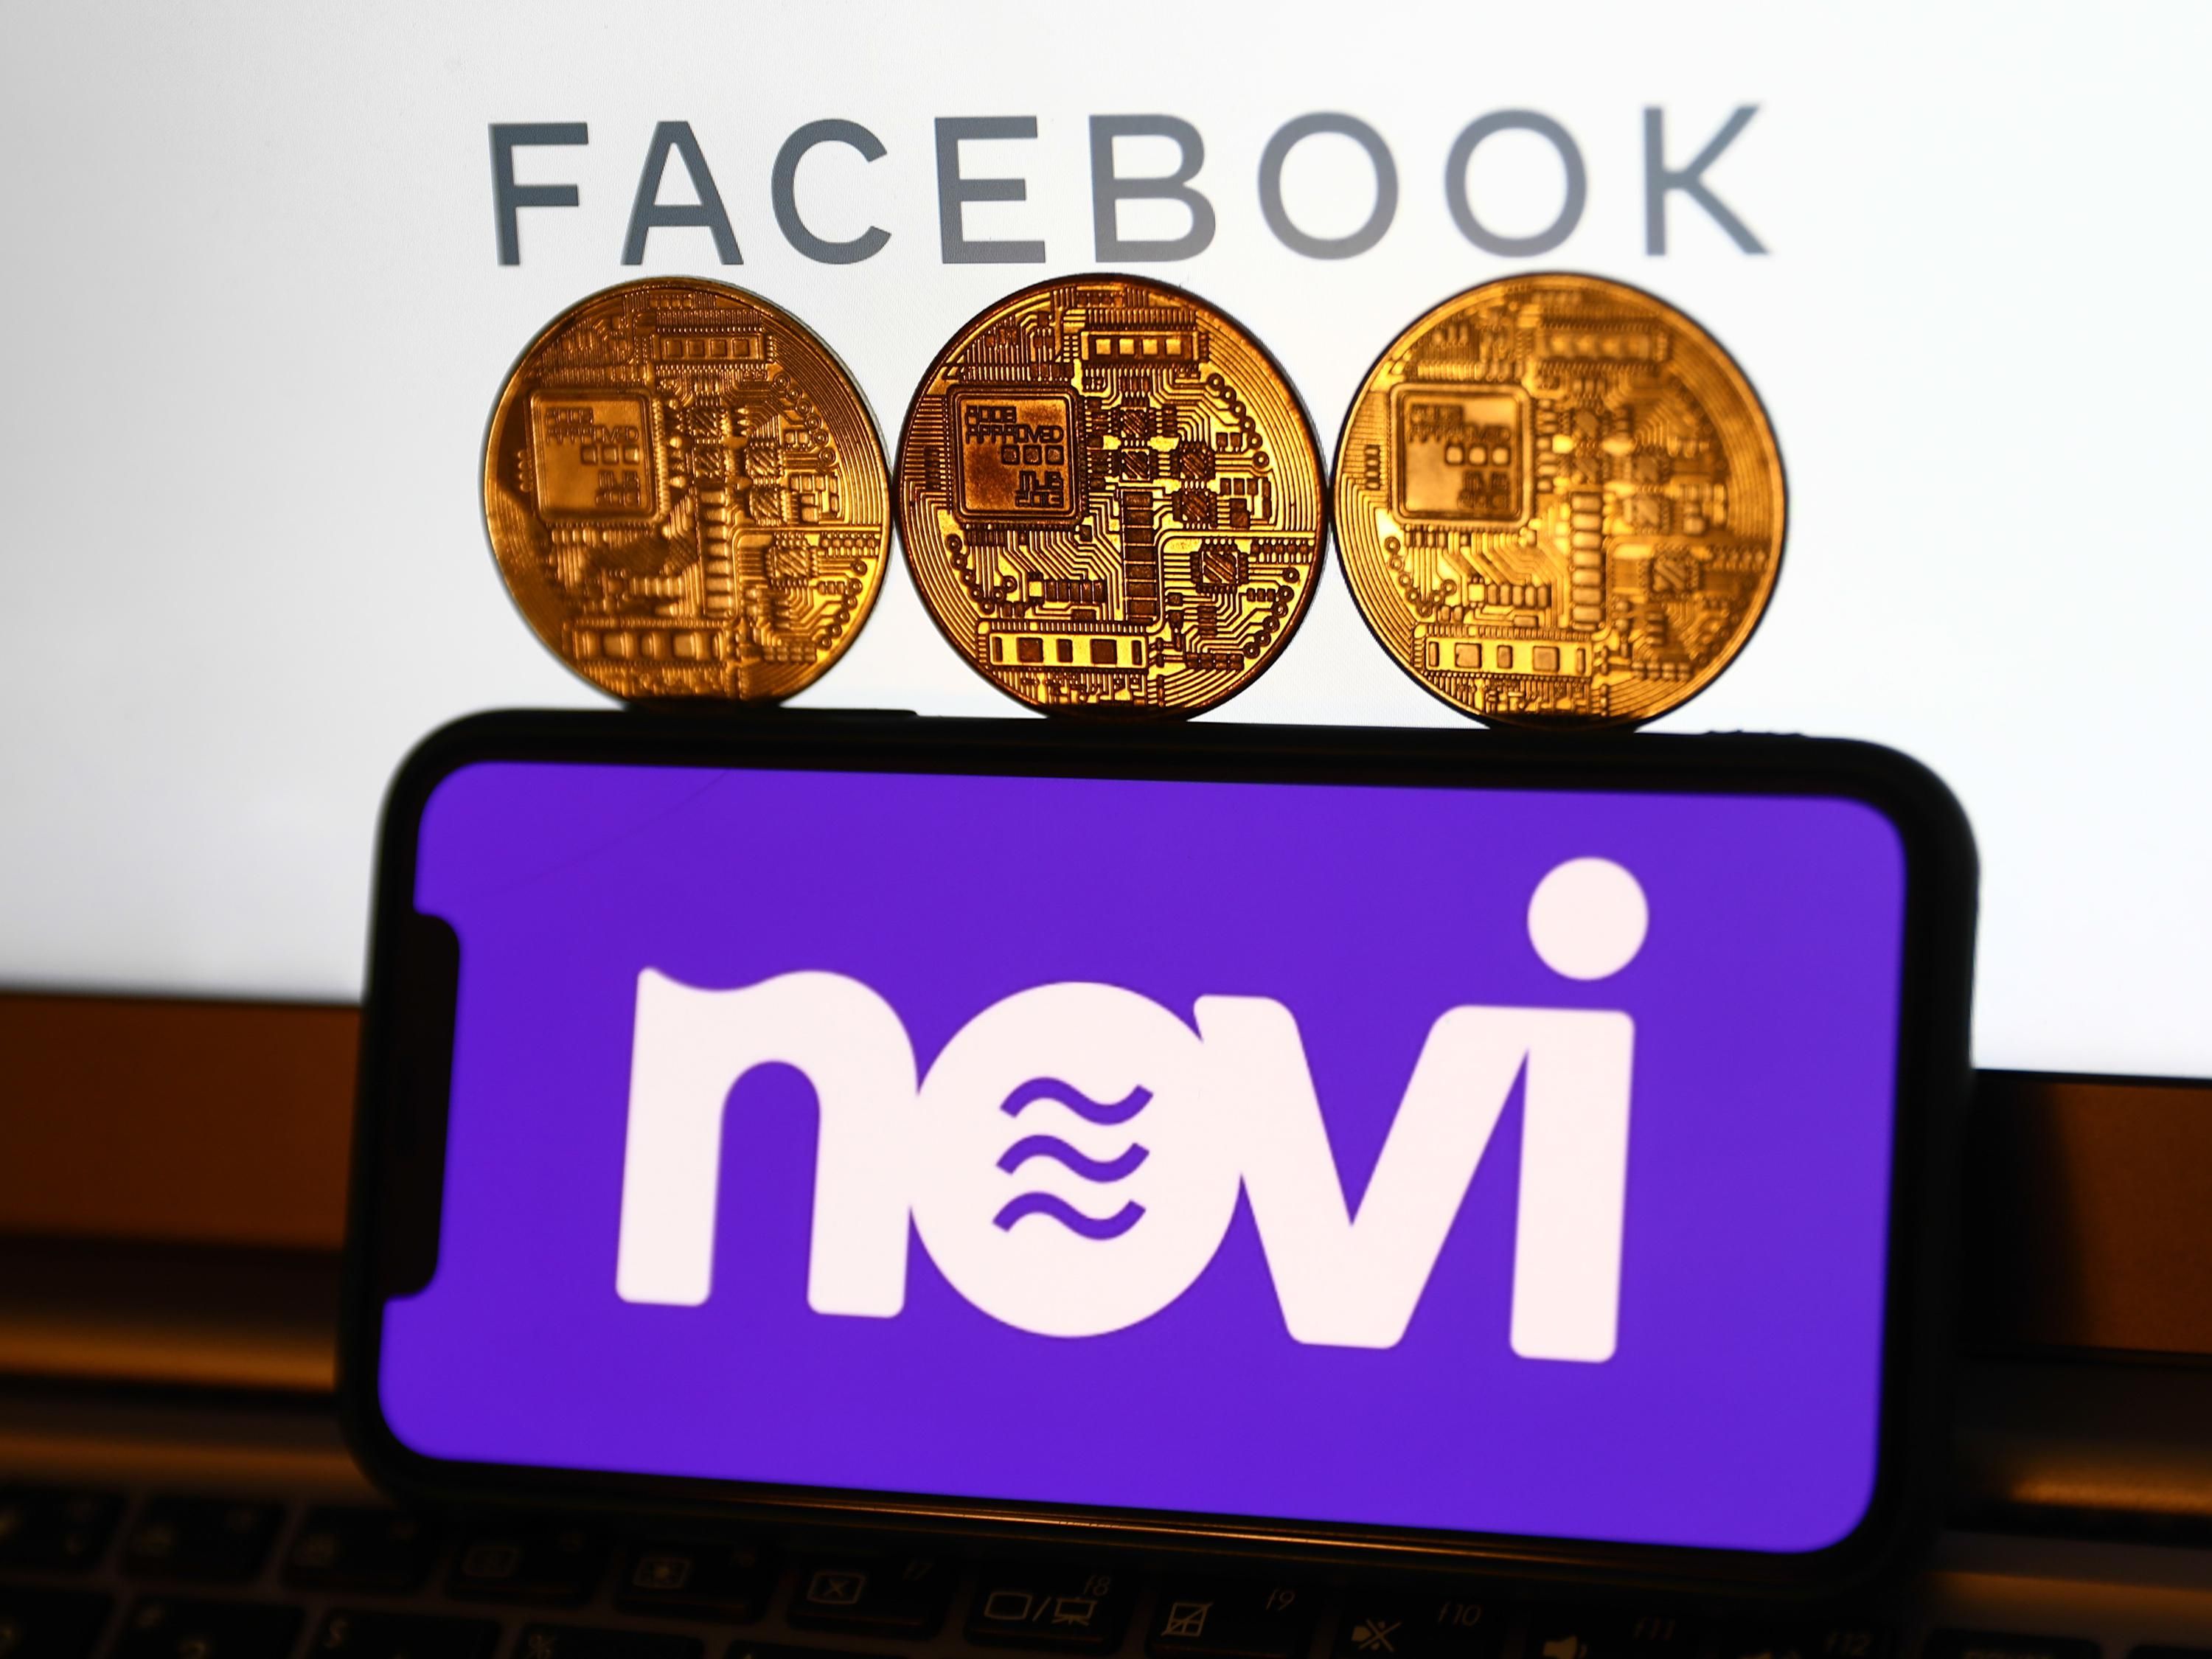 3 gold coins that appear to be etched to look like computer chips sit on top of a phone with the Novi logo. Above the coins is the logo for Facebook.